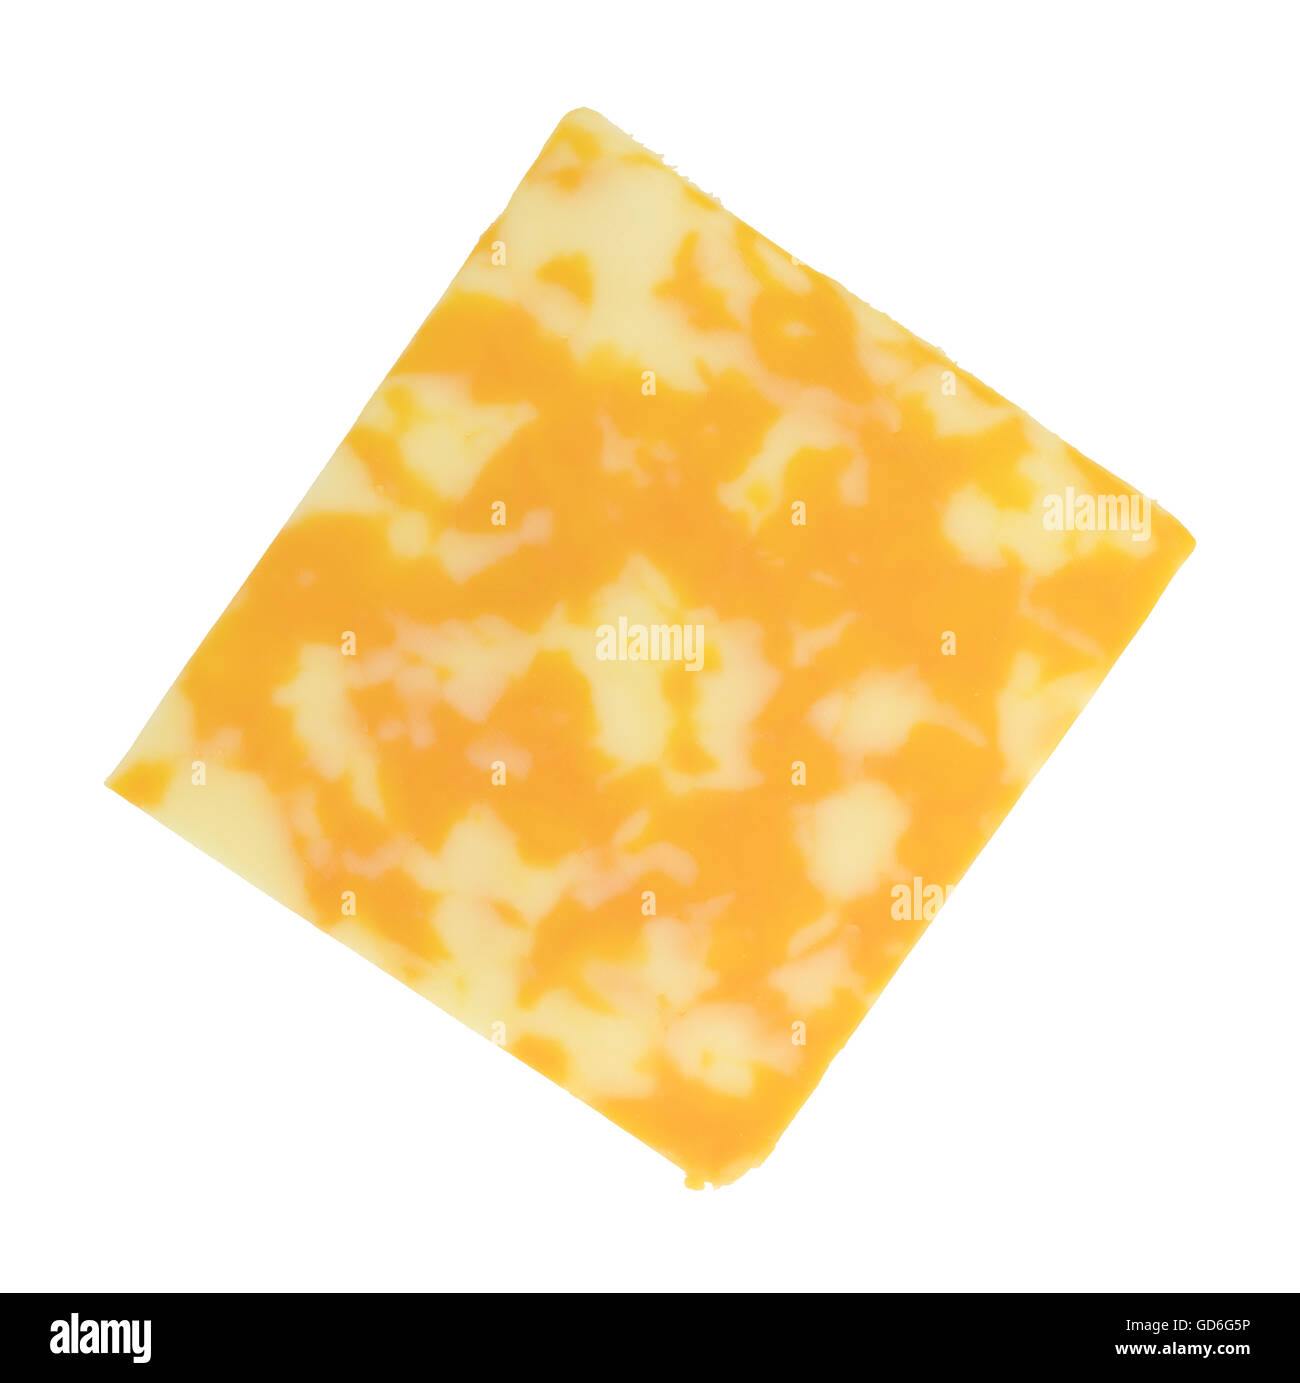 A single slice of Colby-Jack cheese isolated on a white background. Stock Photo